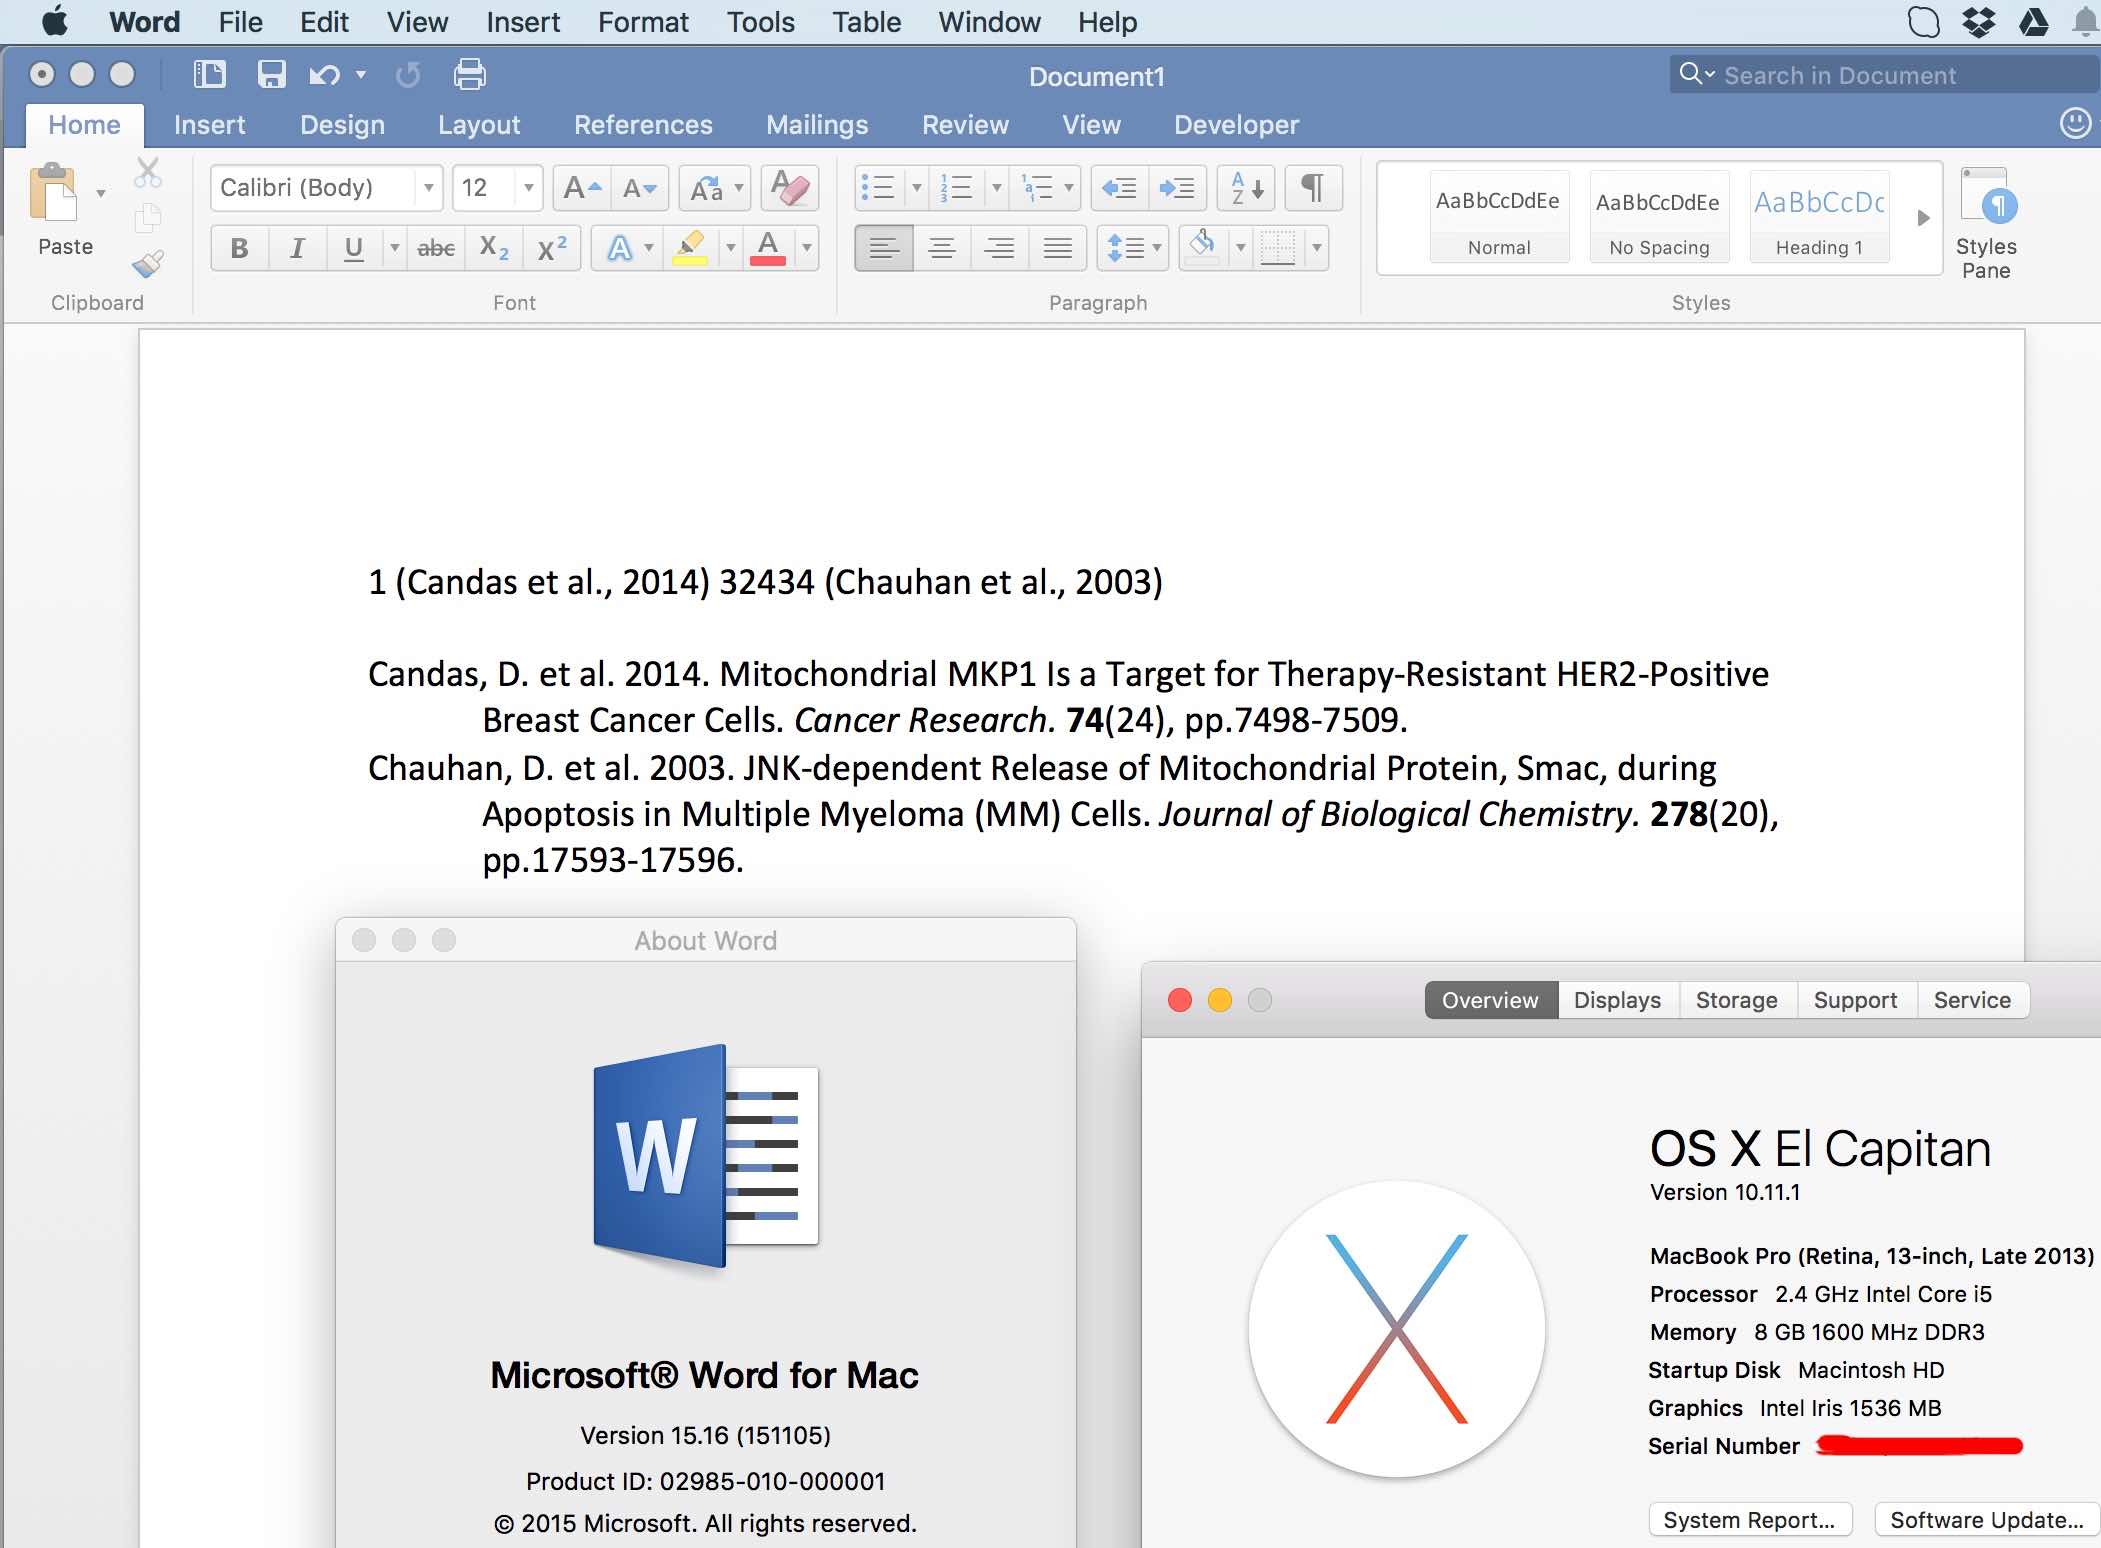 adding endnote to word version 16.15 for mac